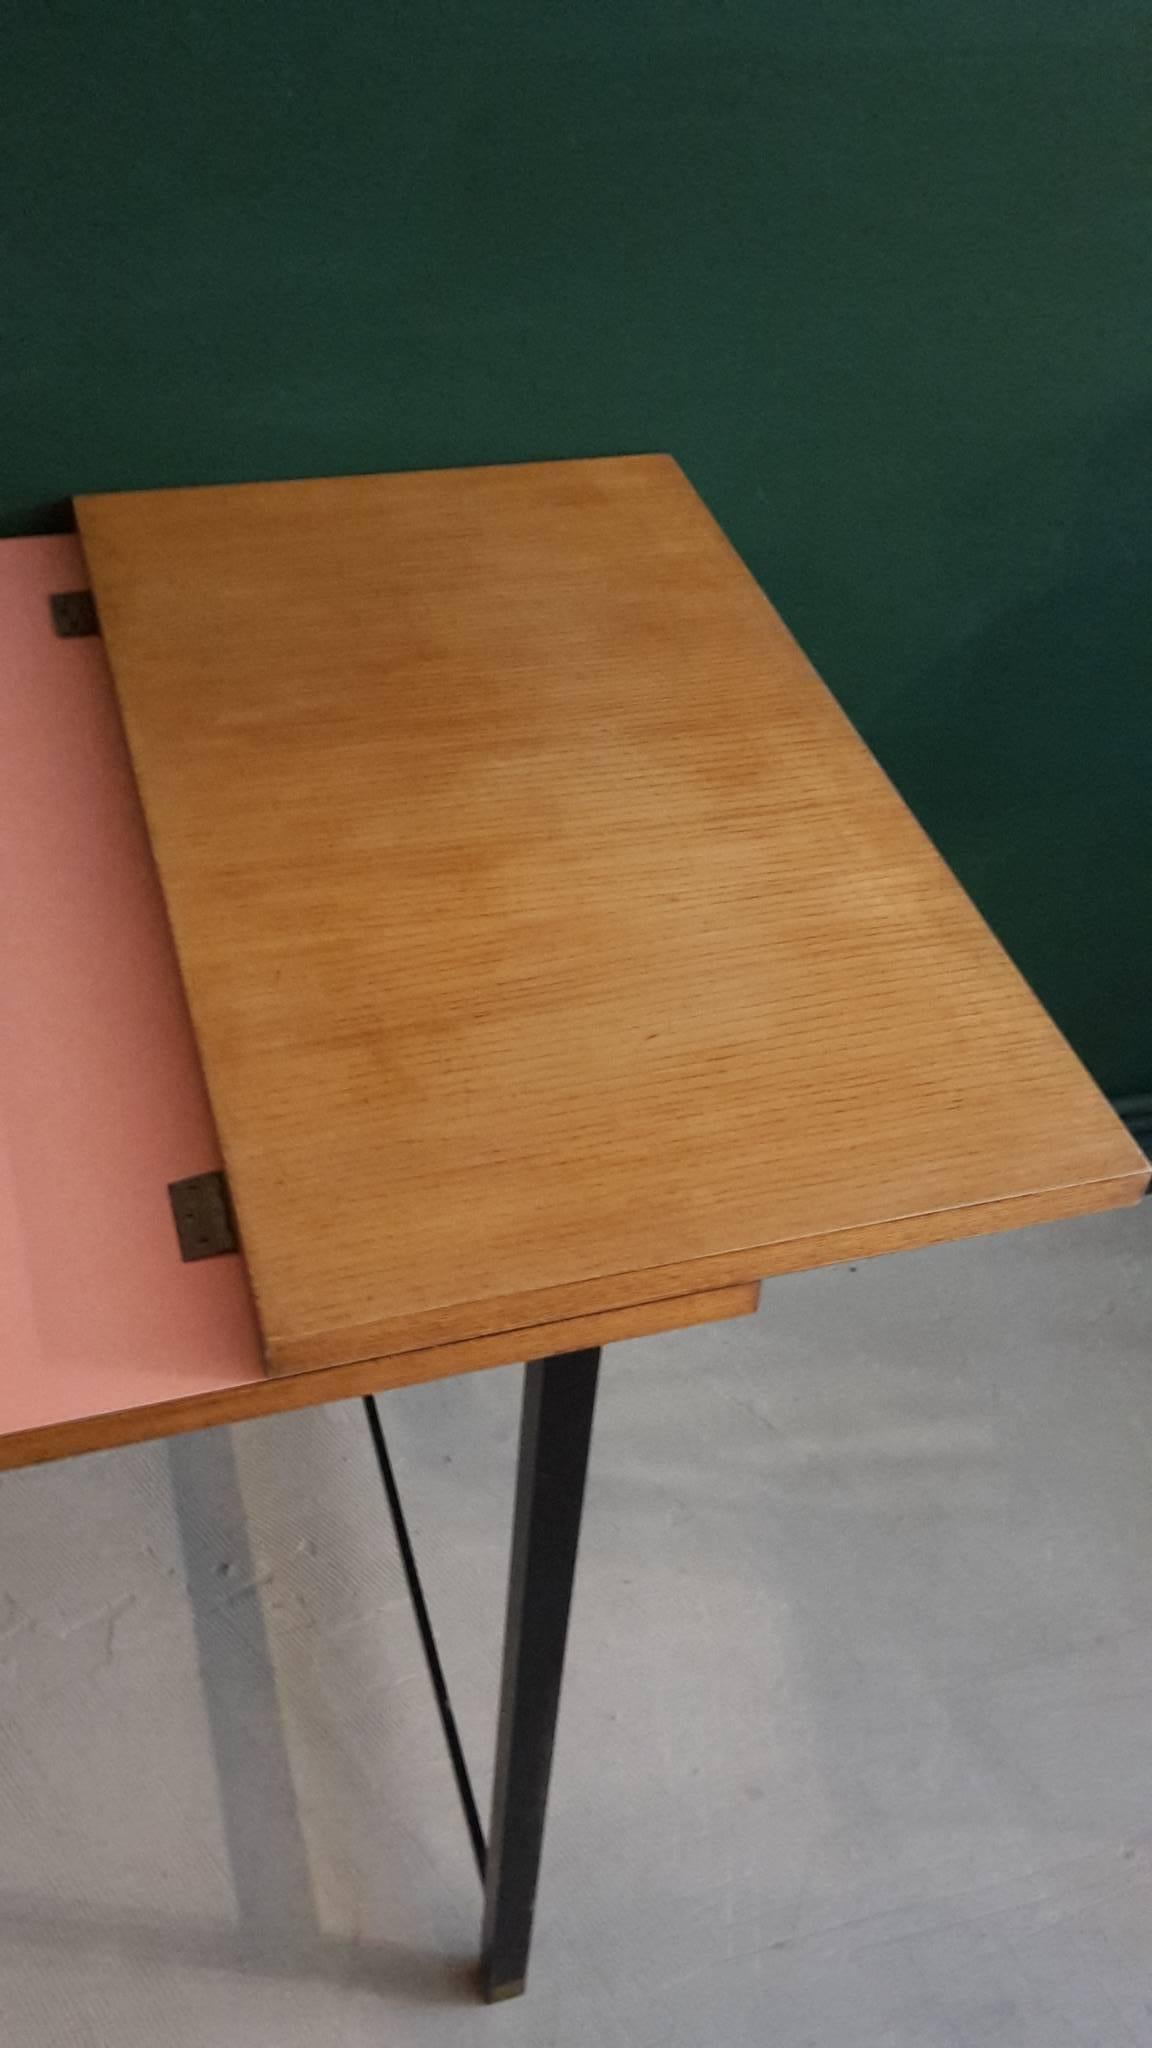 20th Century, Italian Desk 1960s Made of Ash and Peach Formica For Sale 2